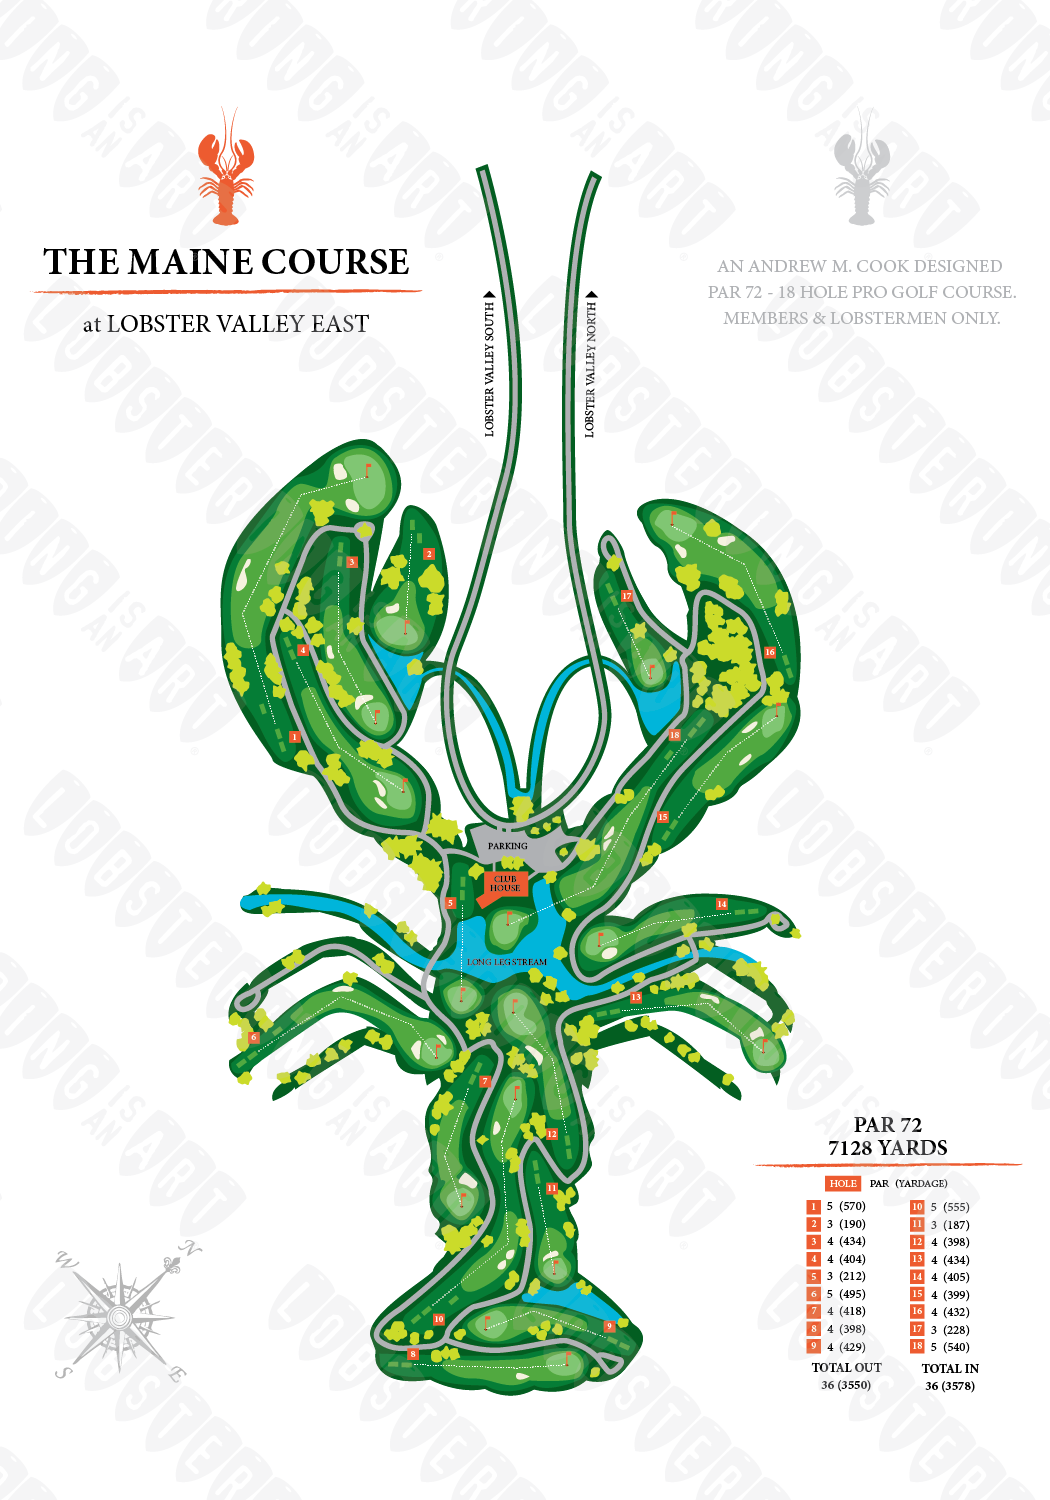 "The Maine Course" - Lobstering Is An Art